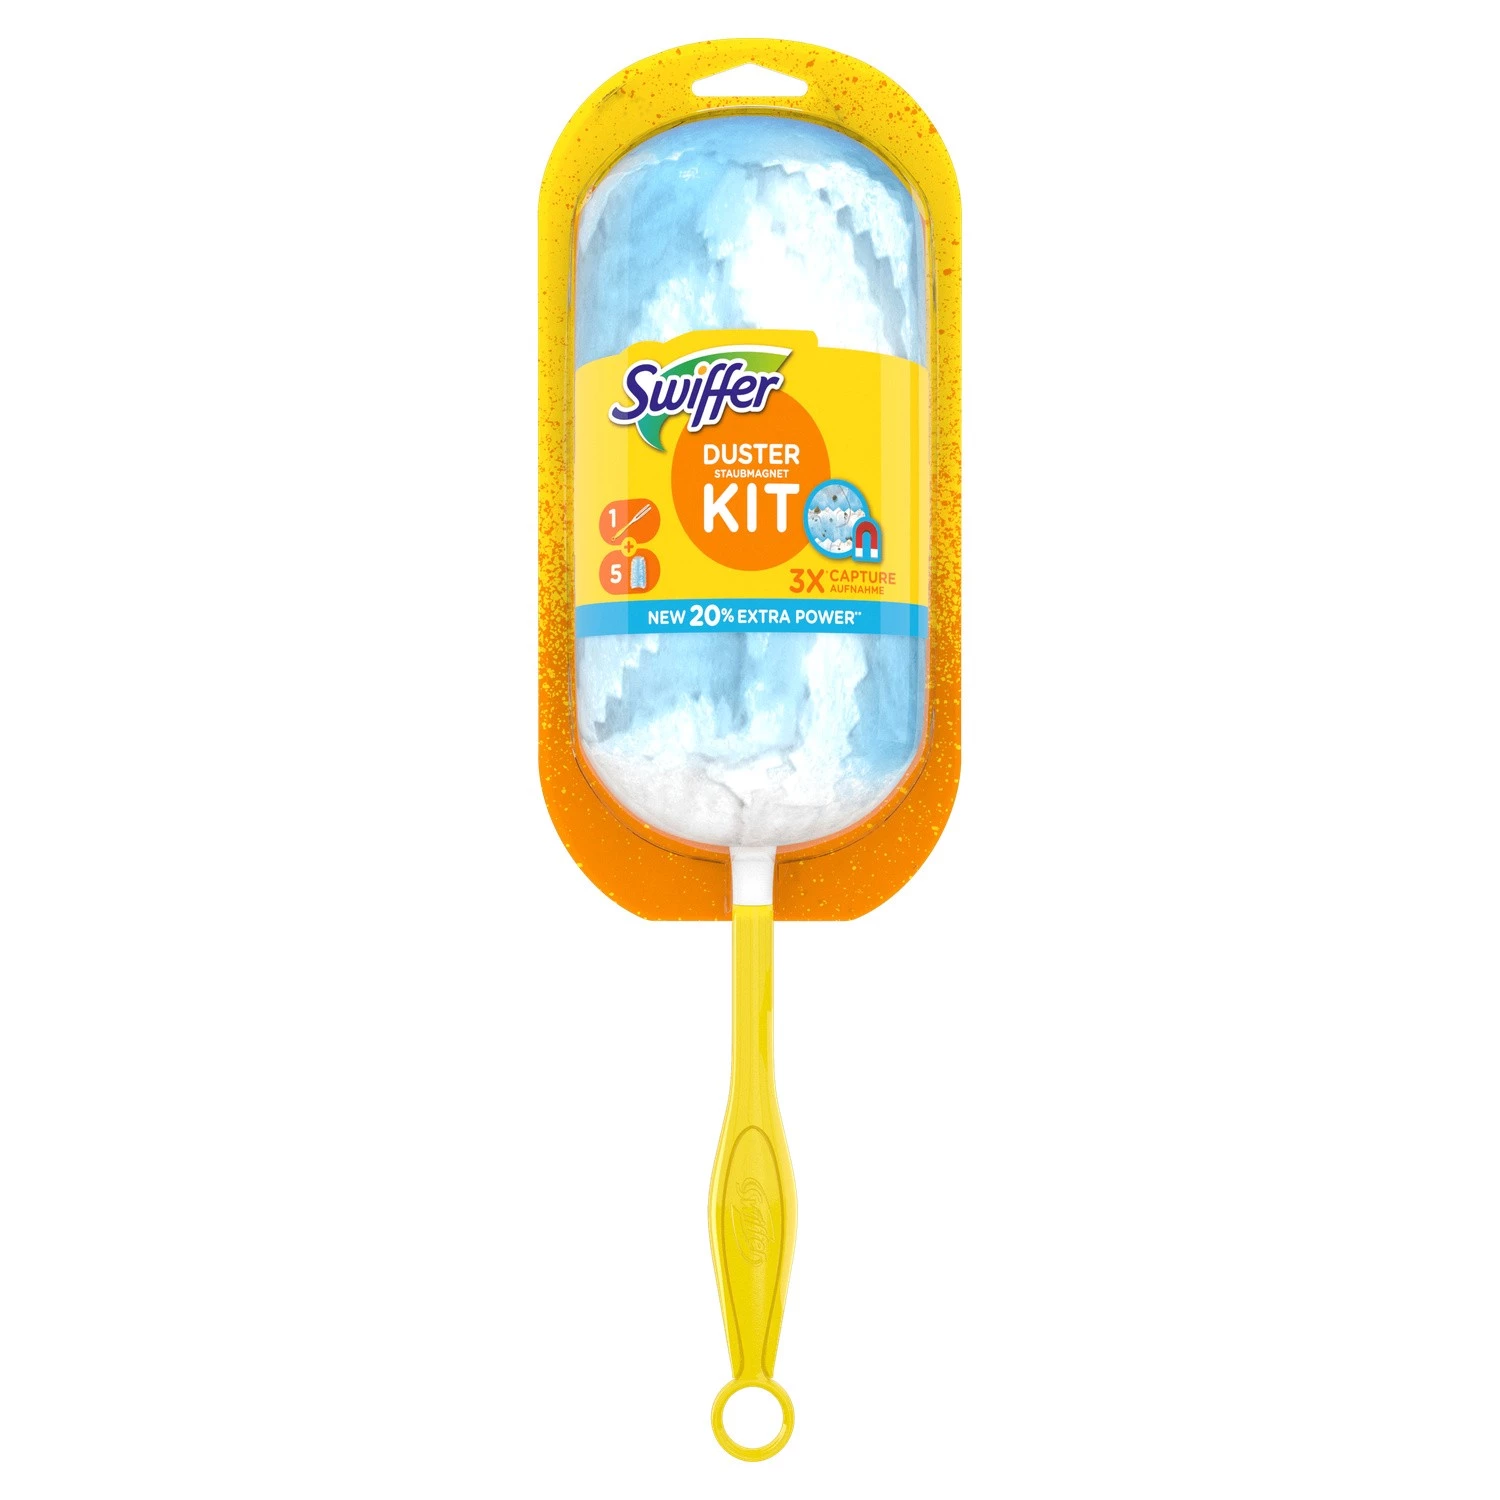 Kit plumeau duster + 5 recharges - SWIFFER